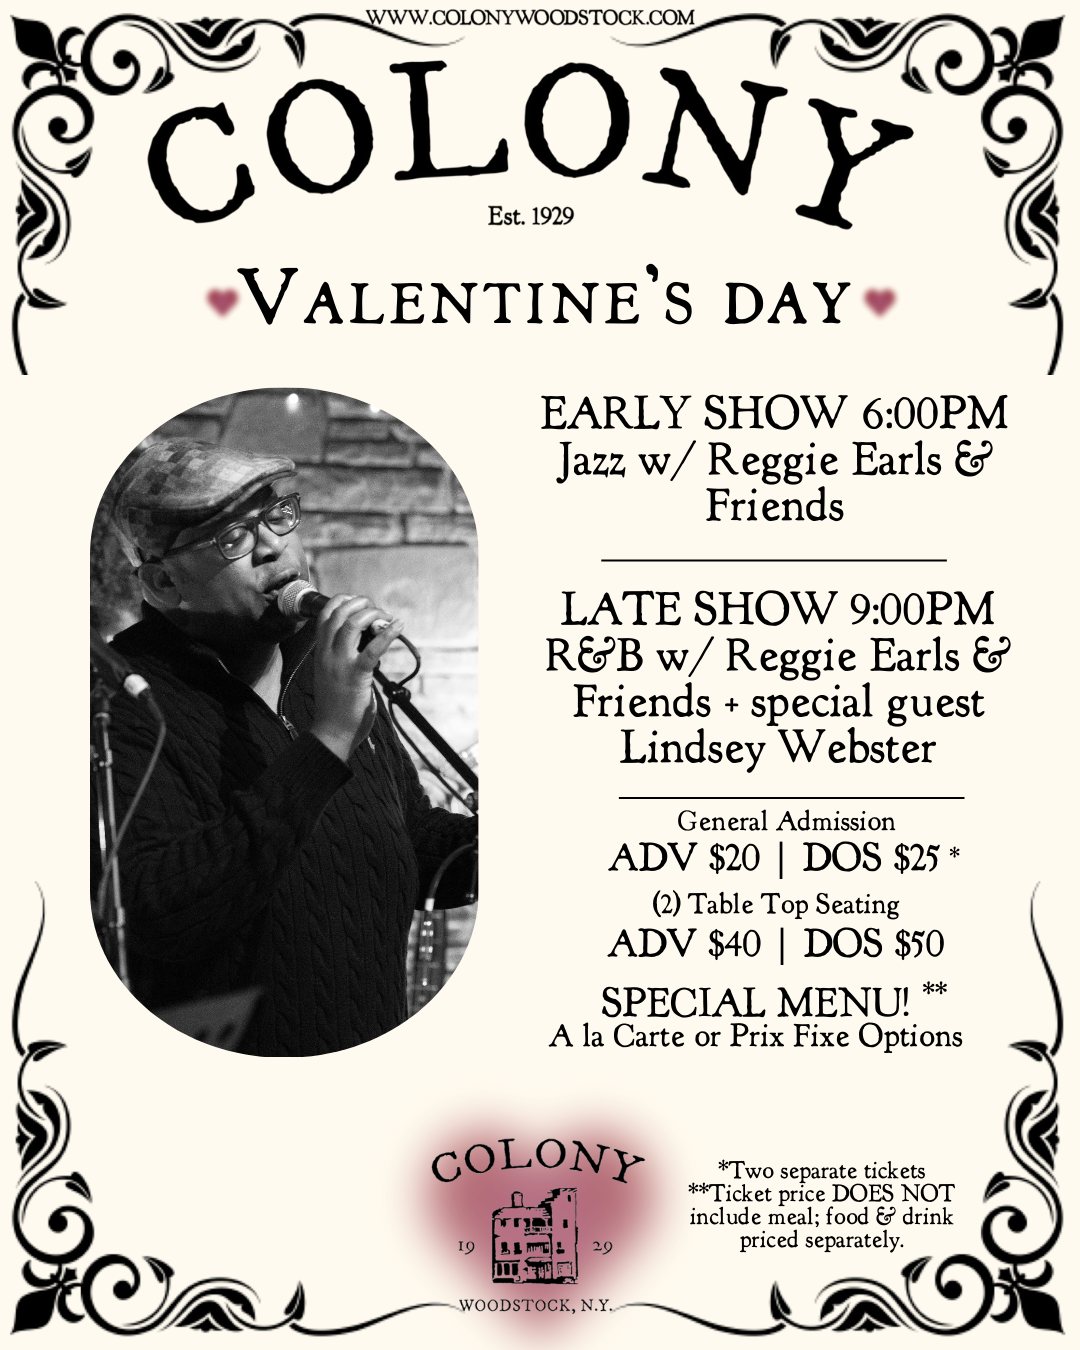 Early Show: Valentine’s Day Jazz with Reggie Earls and Friends!